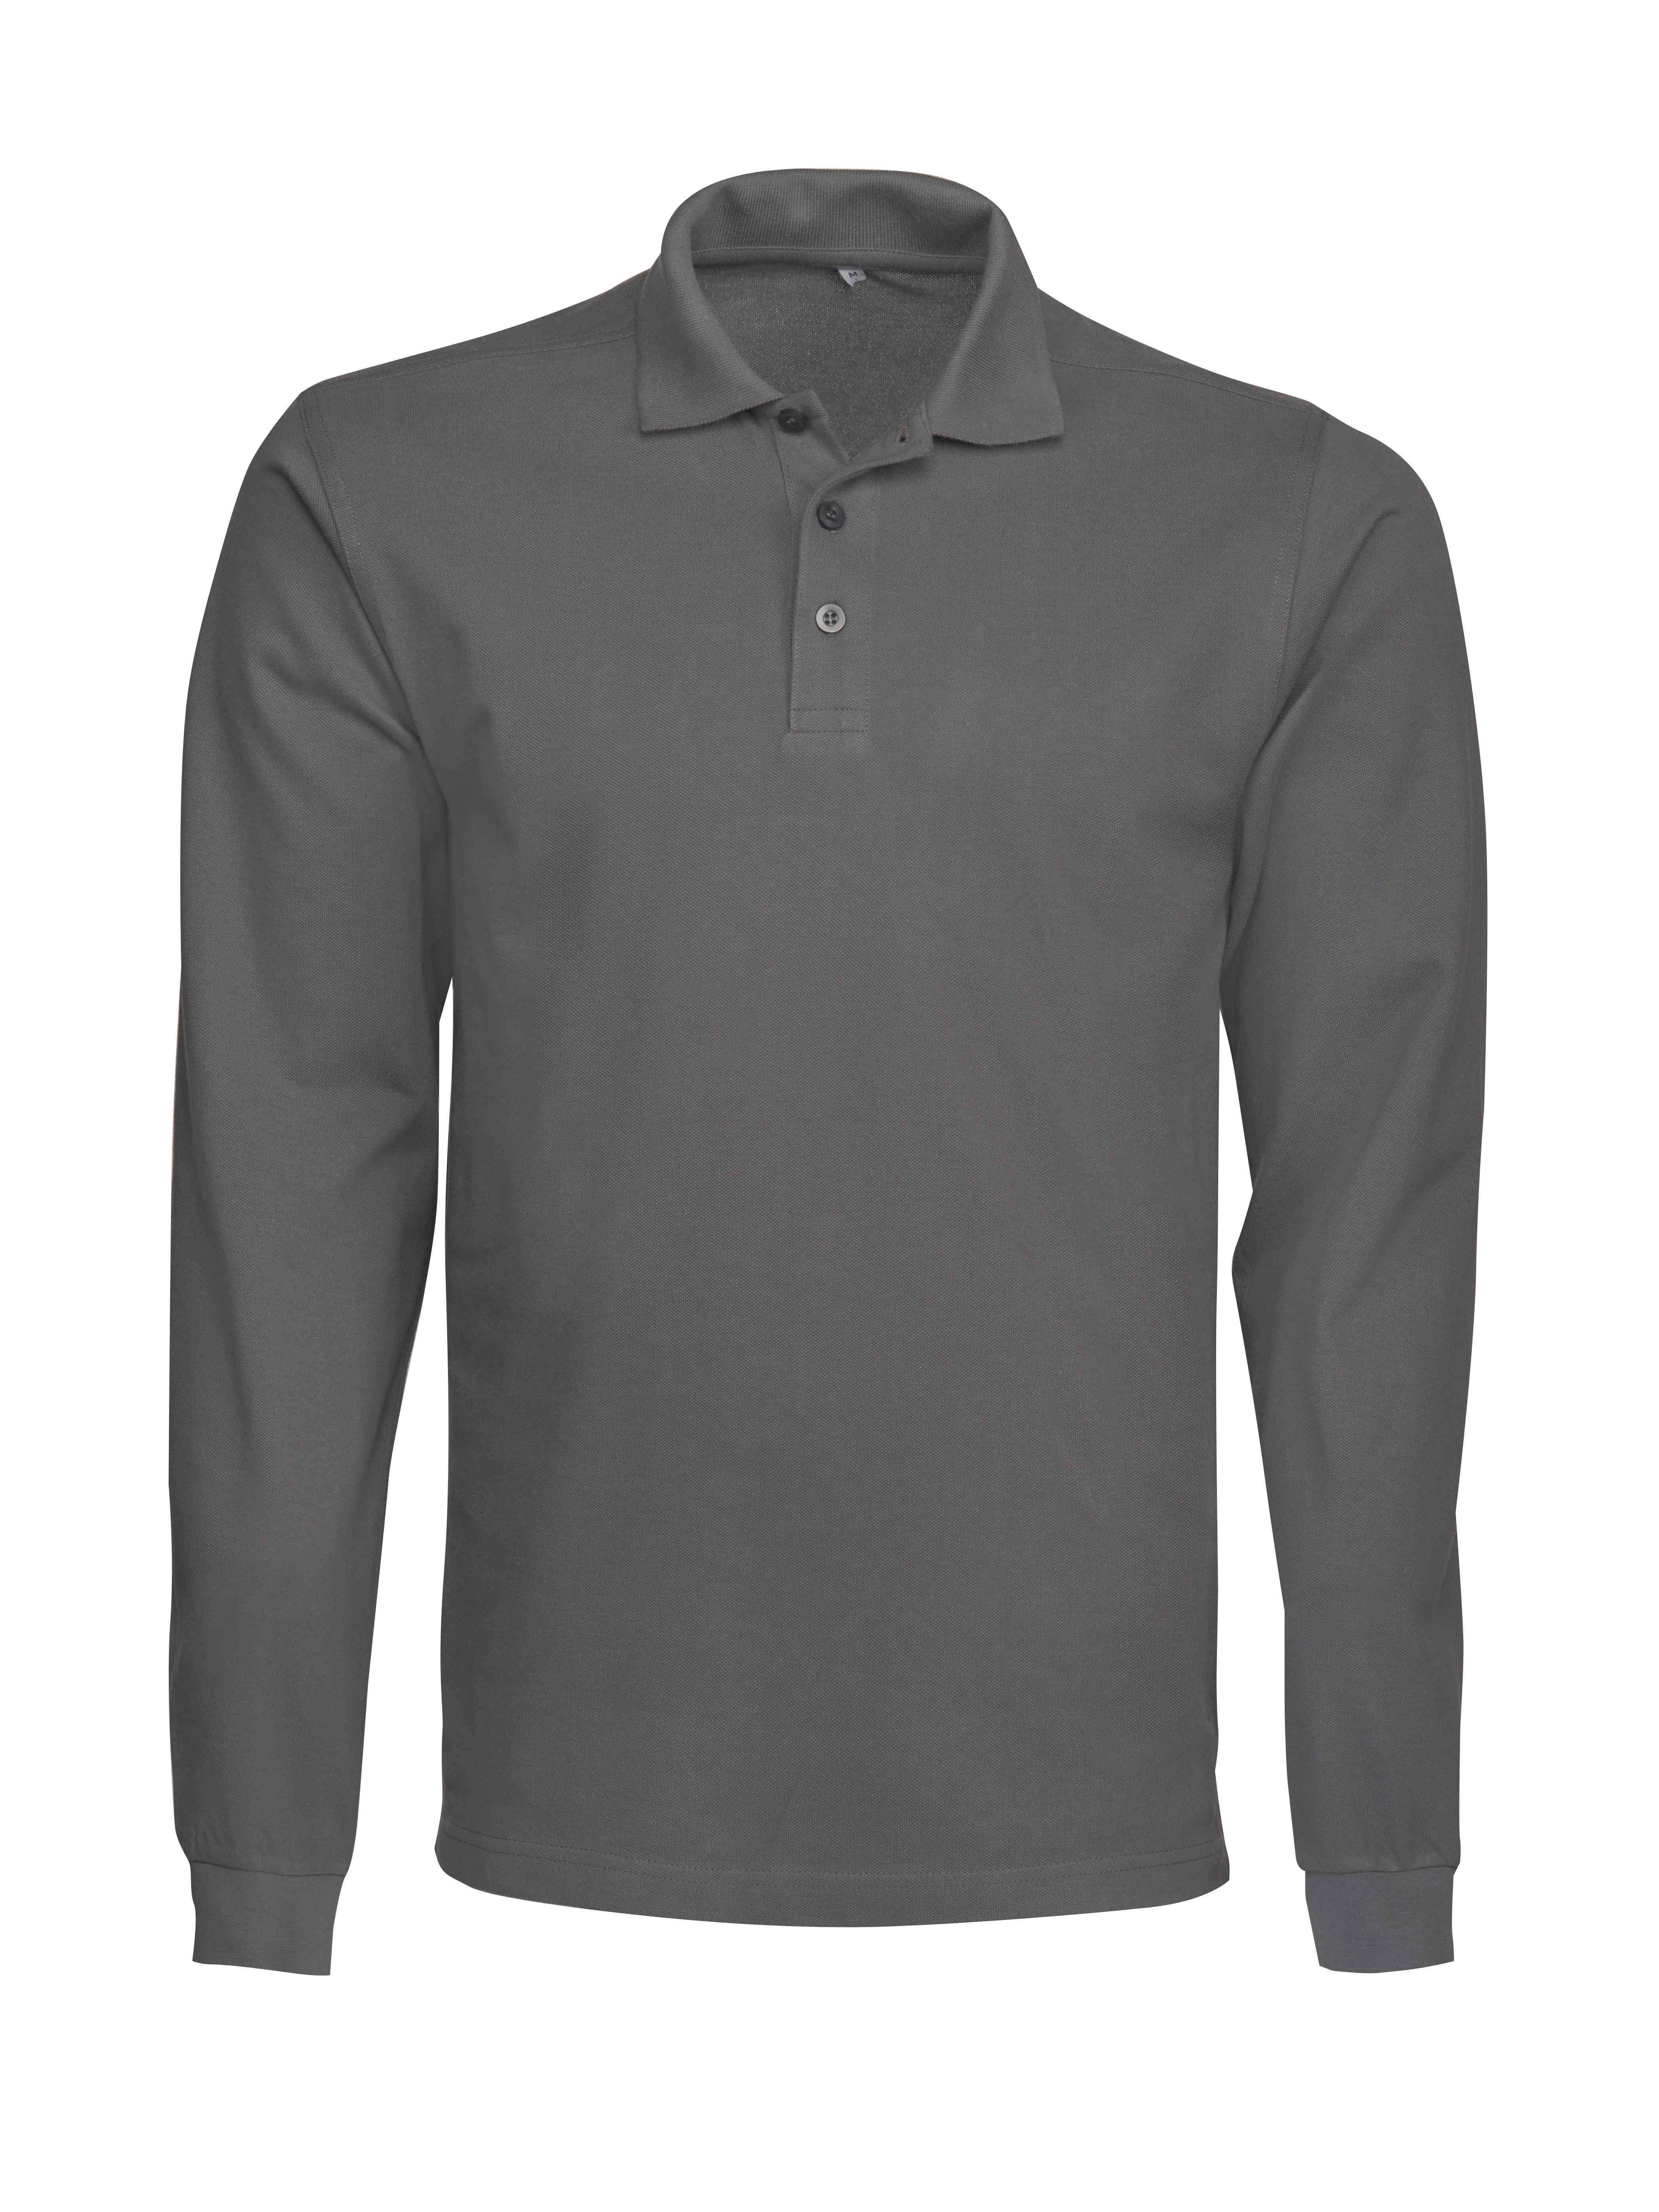 SURF POLO RSX L/S STEEL GREY PE-2265011-935-4